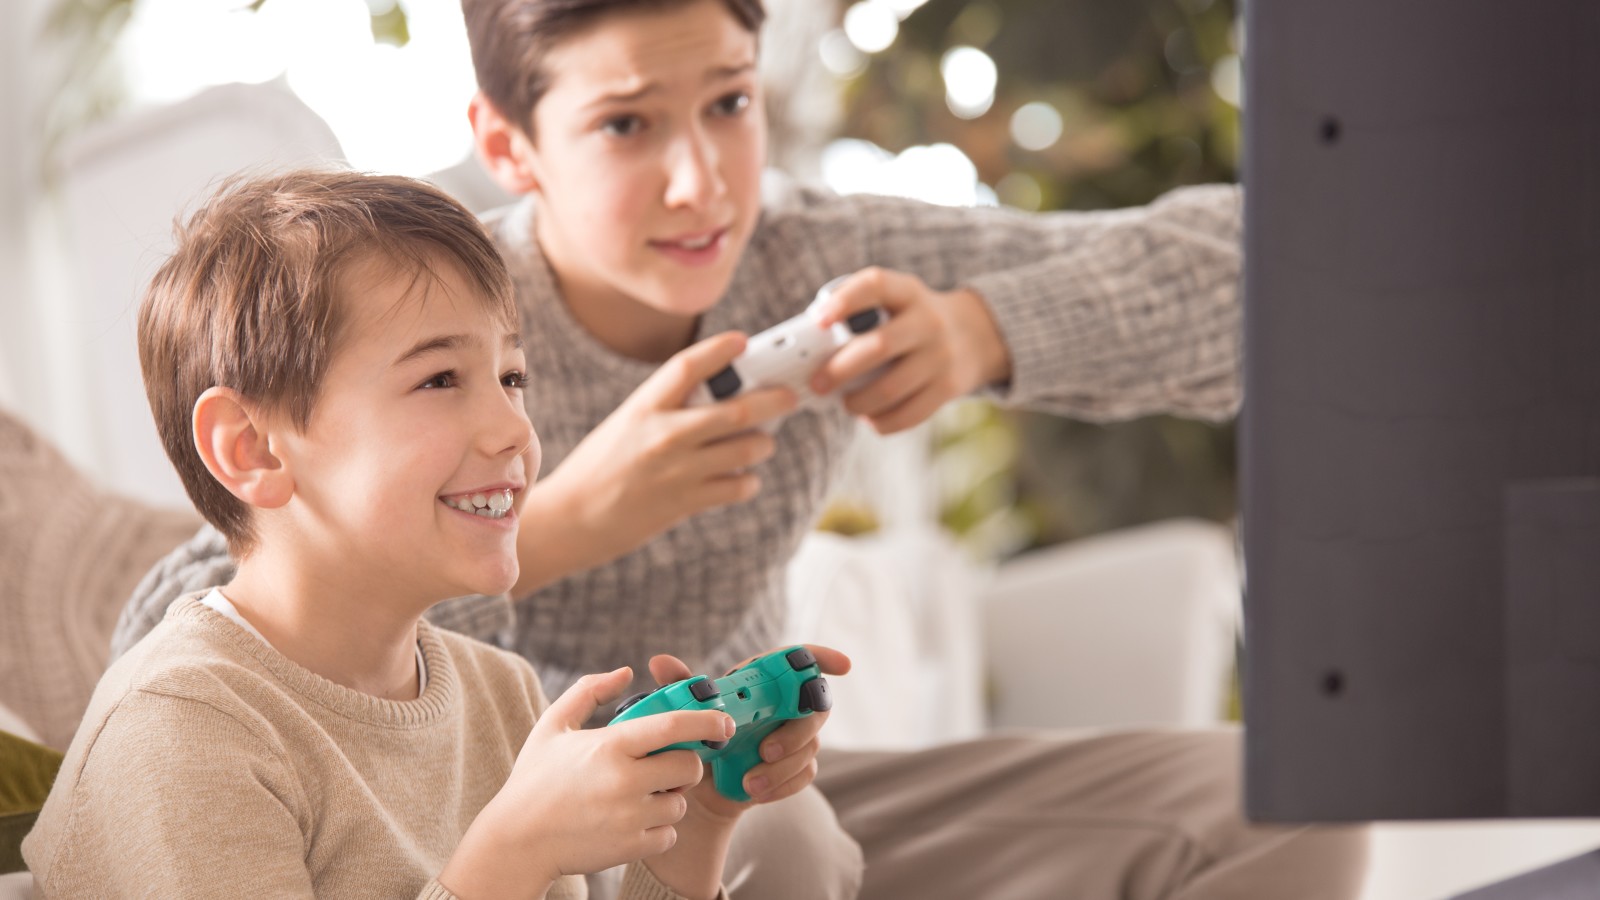 How to set up PlayStation parental controls - Uswitch